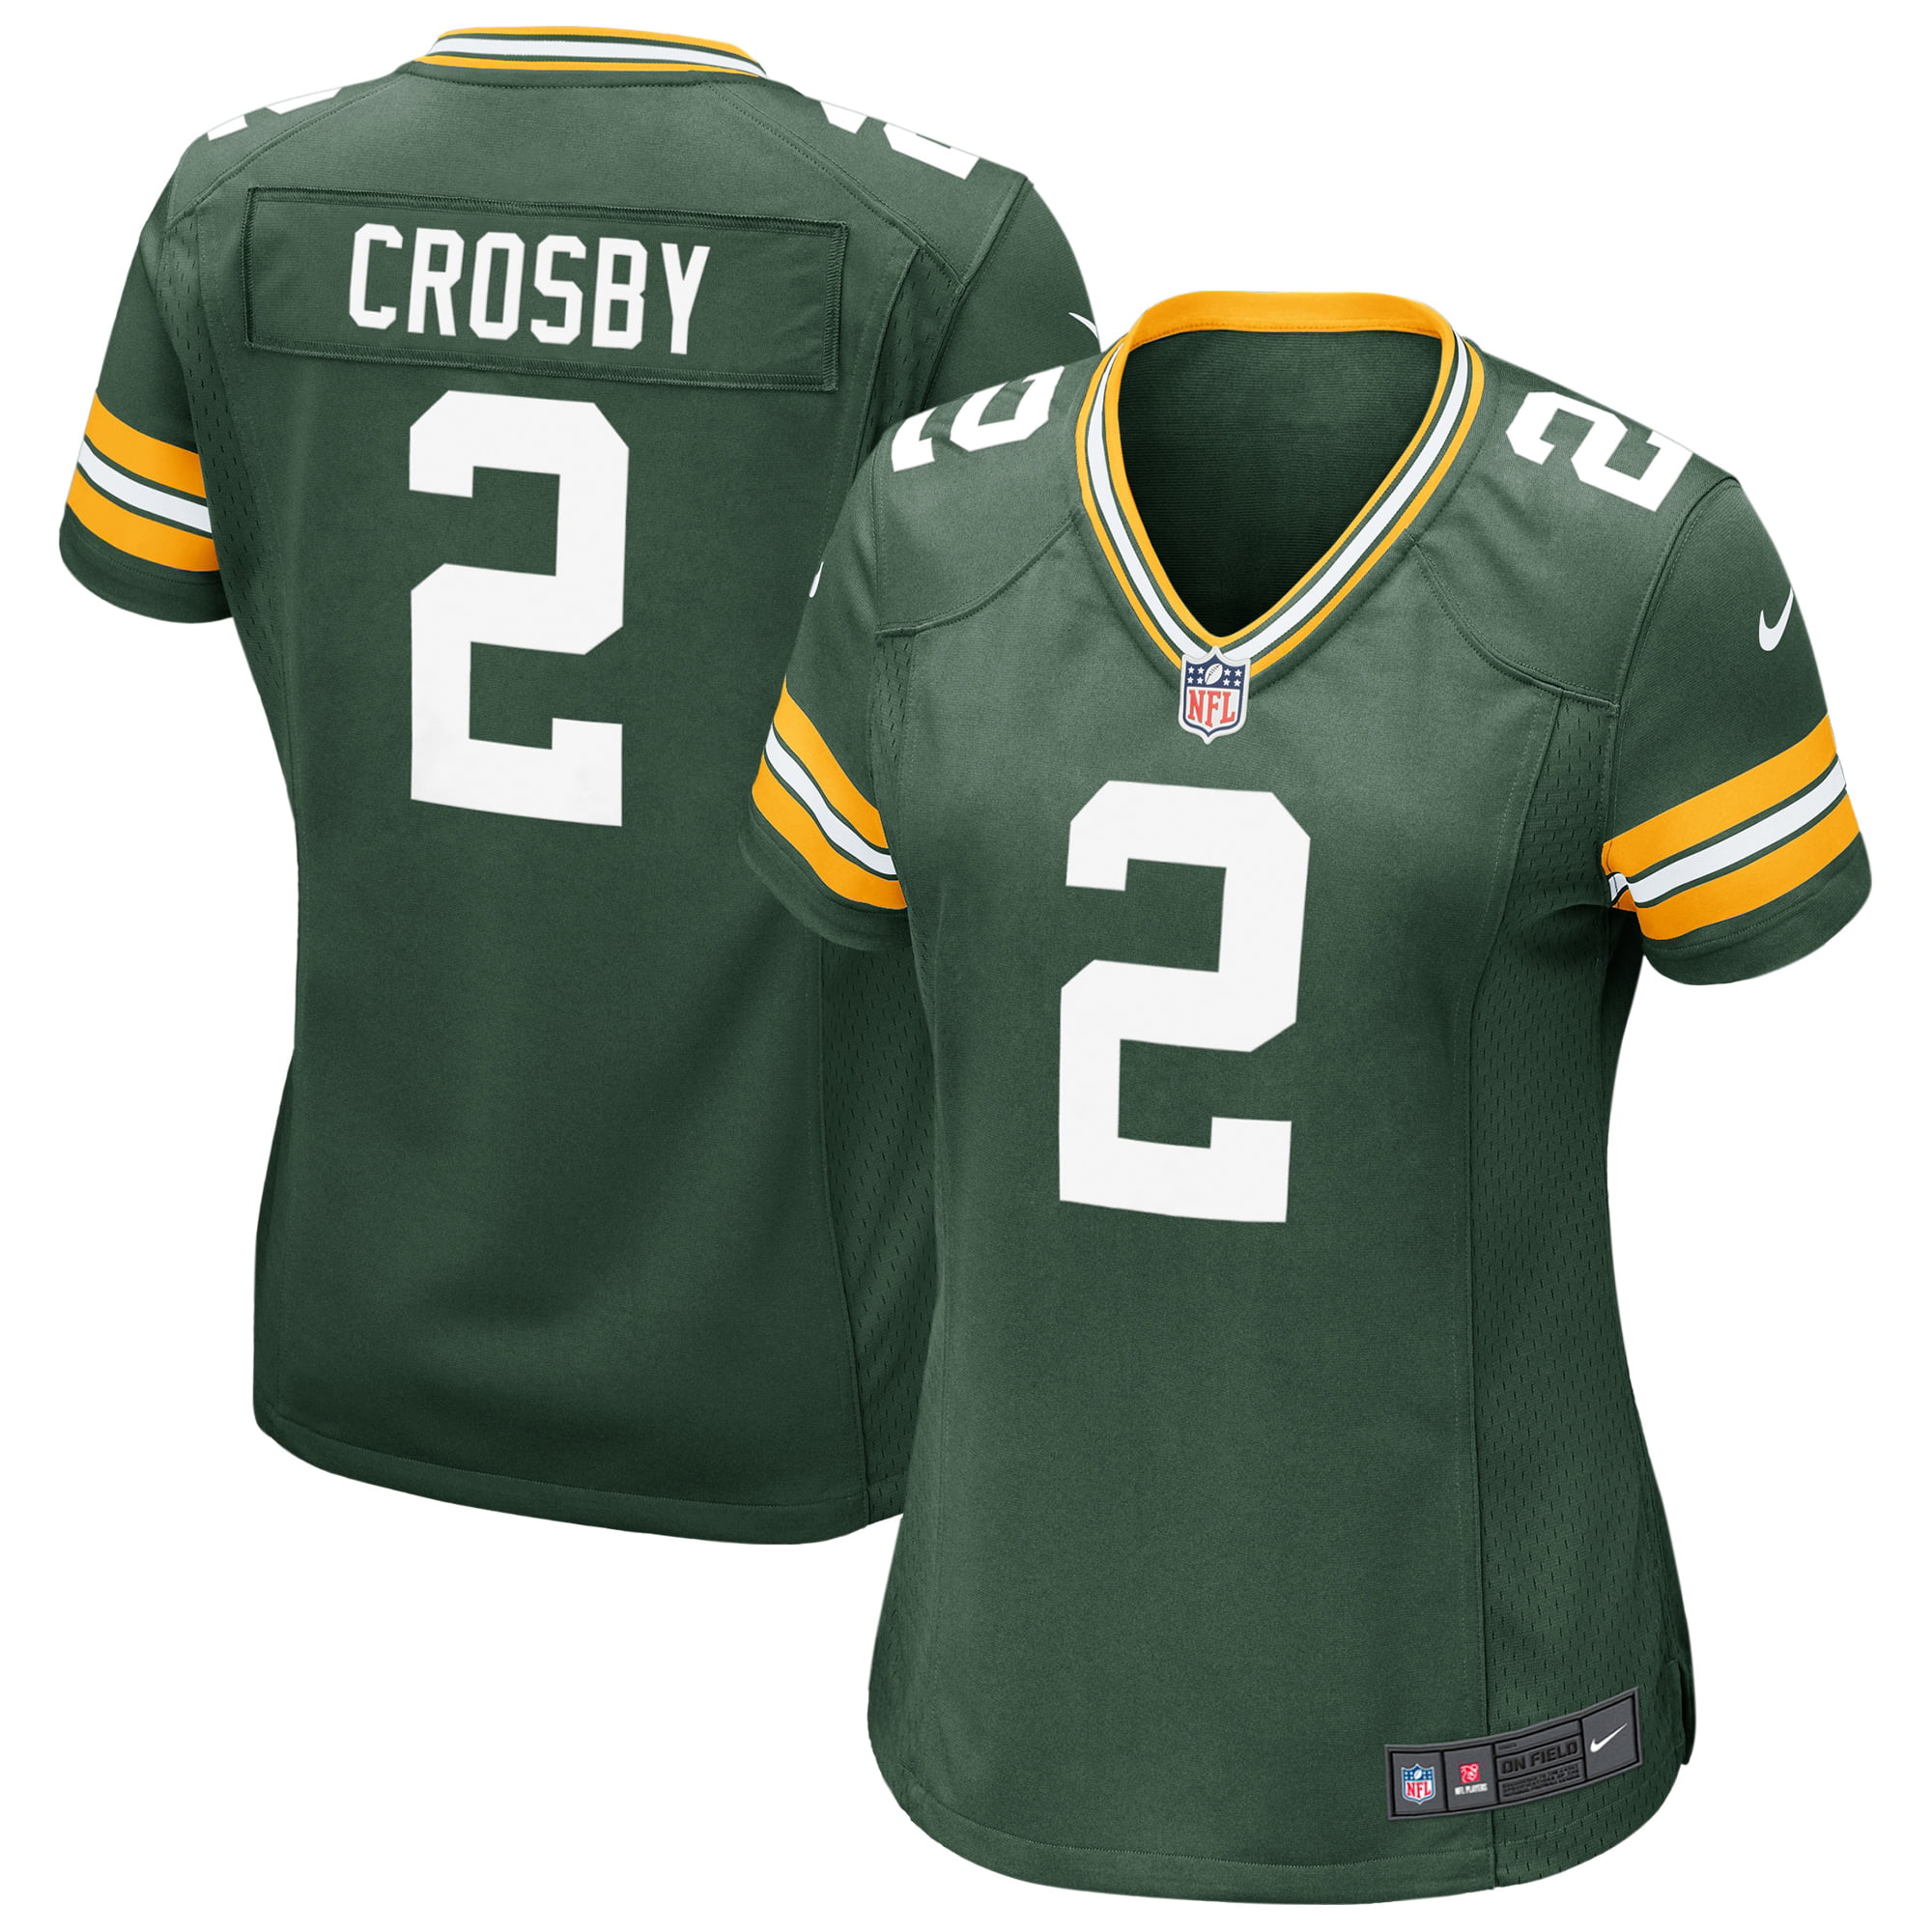 5t packers jersey